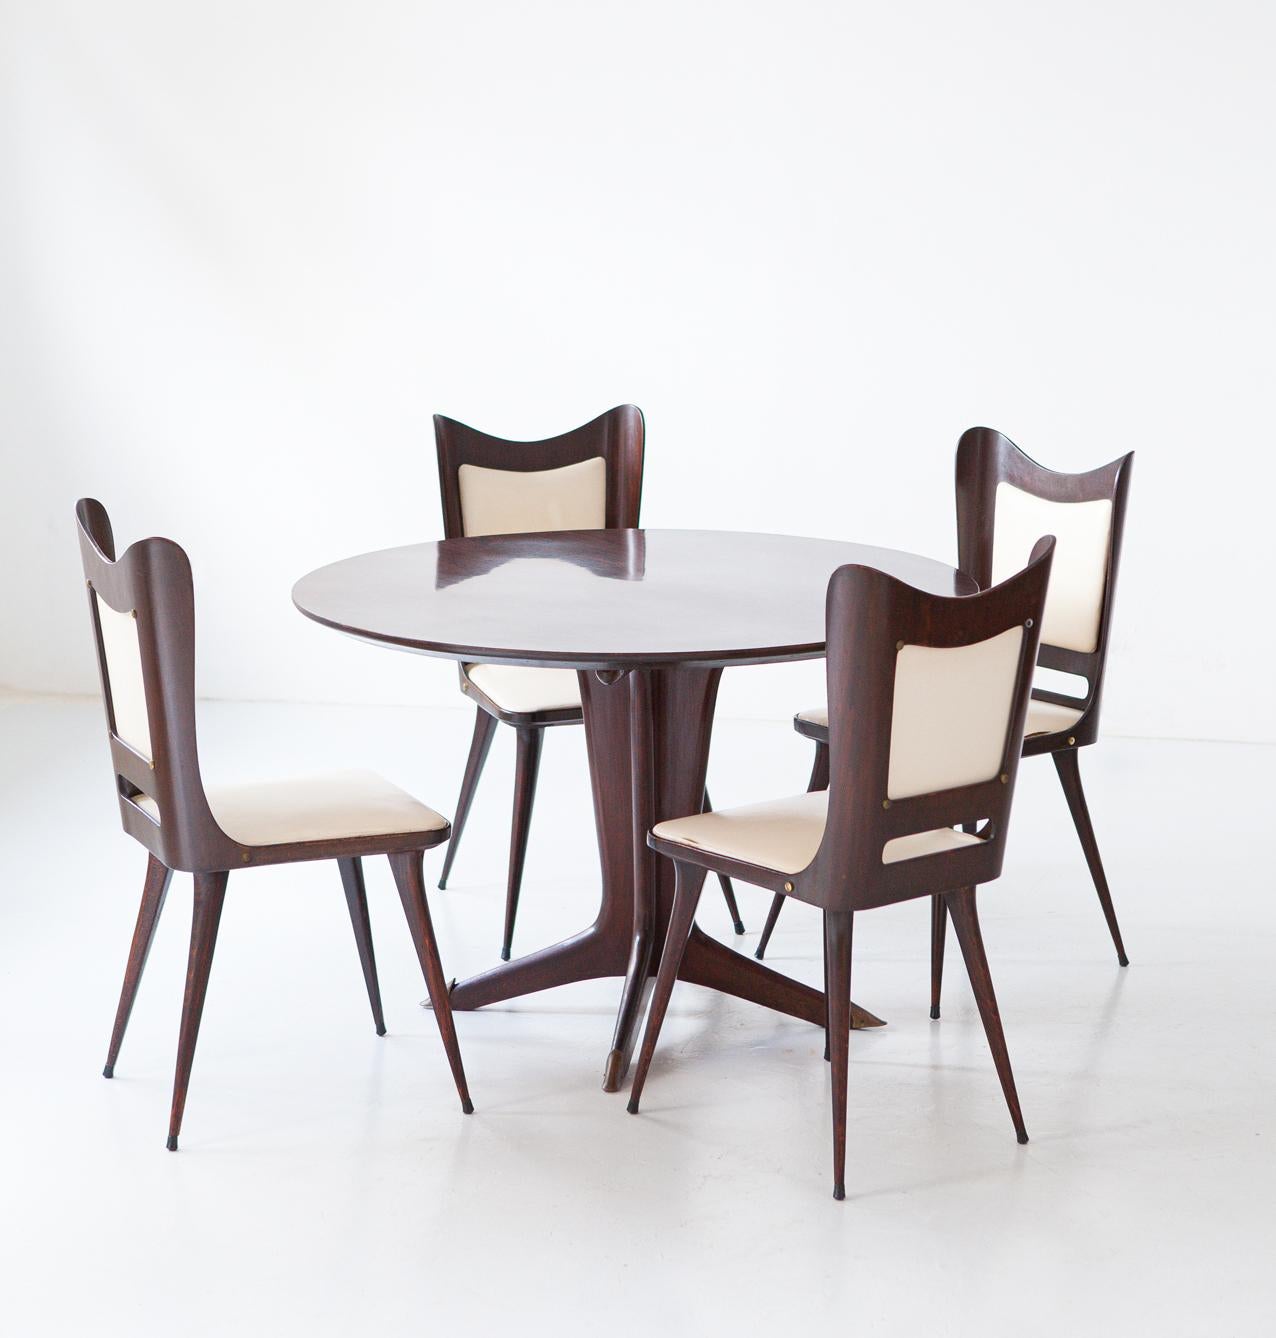 Italian Round Wooden Dining Table with 4 Chairs Set by Carlo Ratti 9